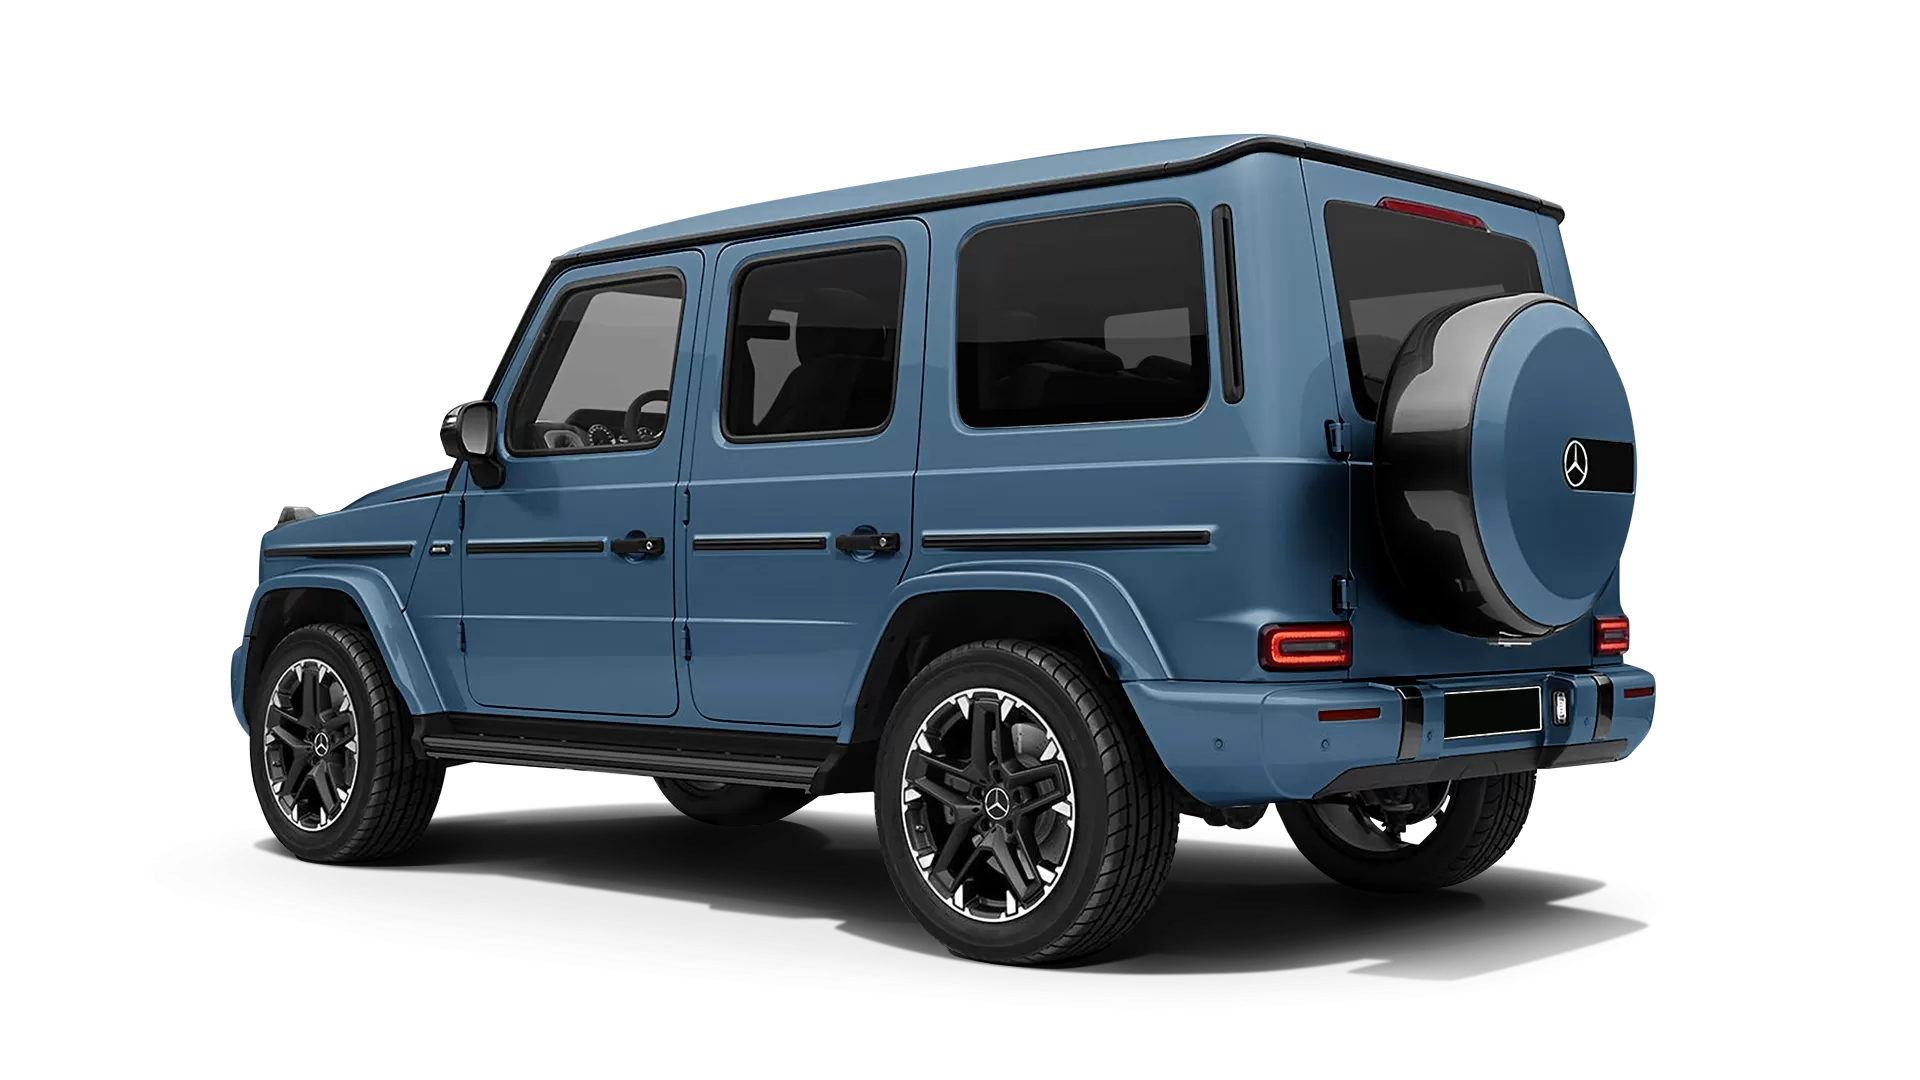 Mercedes G class W463 stock rear view in Vintage Blue color